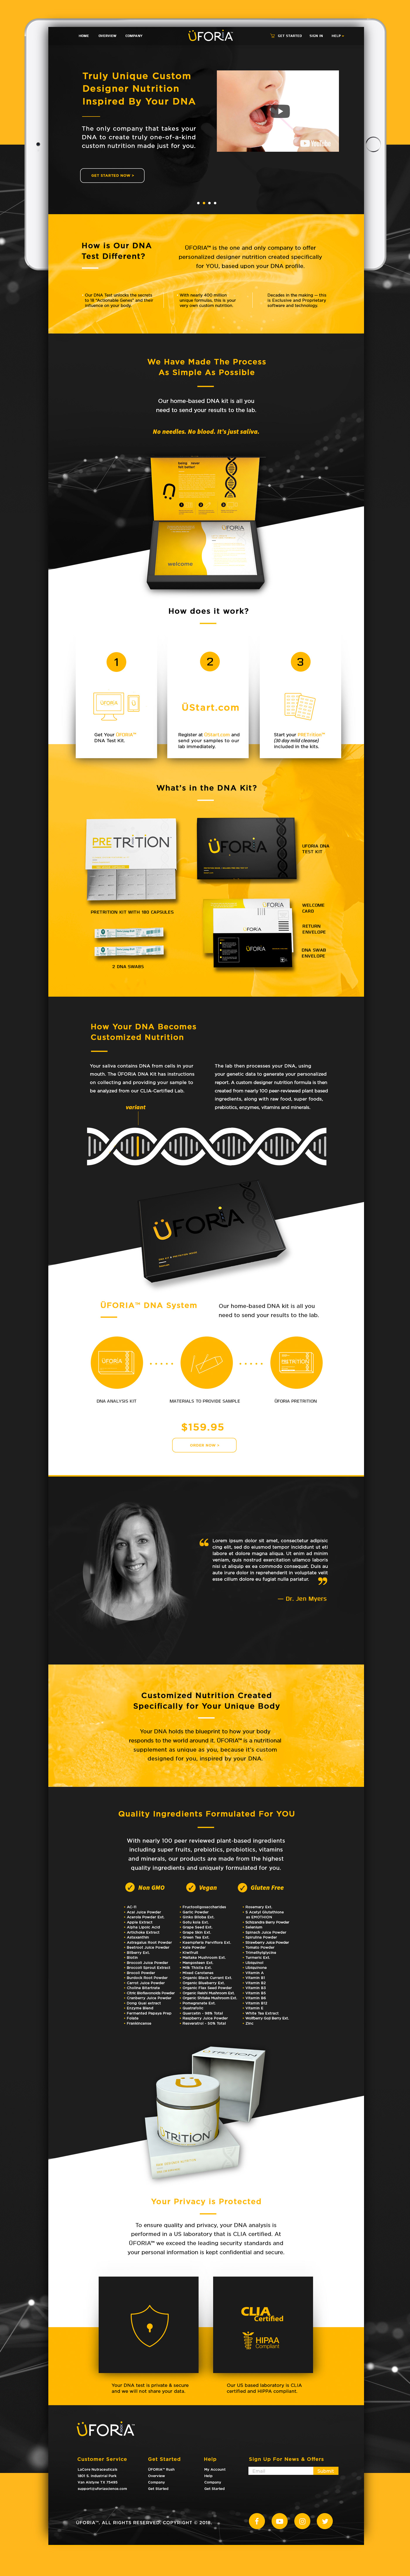 dna testing kit box Editorial Layouts icons and DNA Helix inspire logo branding nutritional supplements pantone colors rank pins supplemental packaging Webpage designs